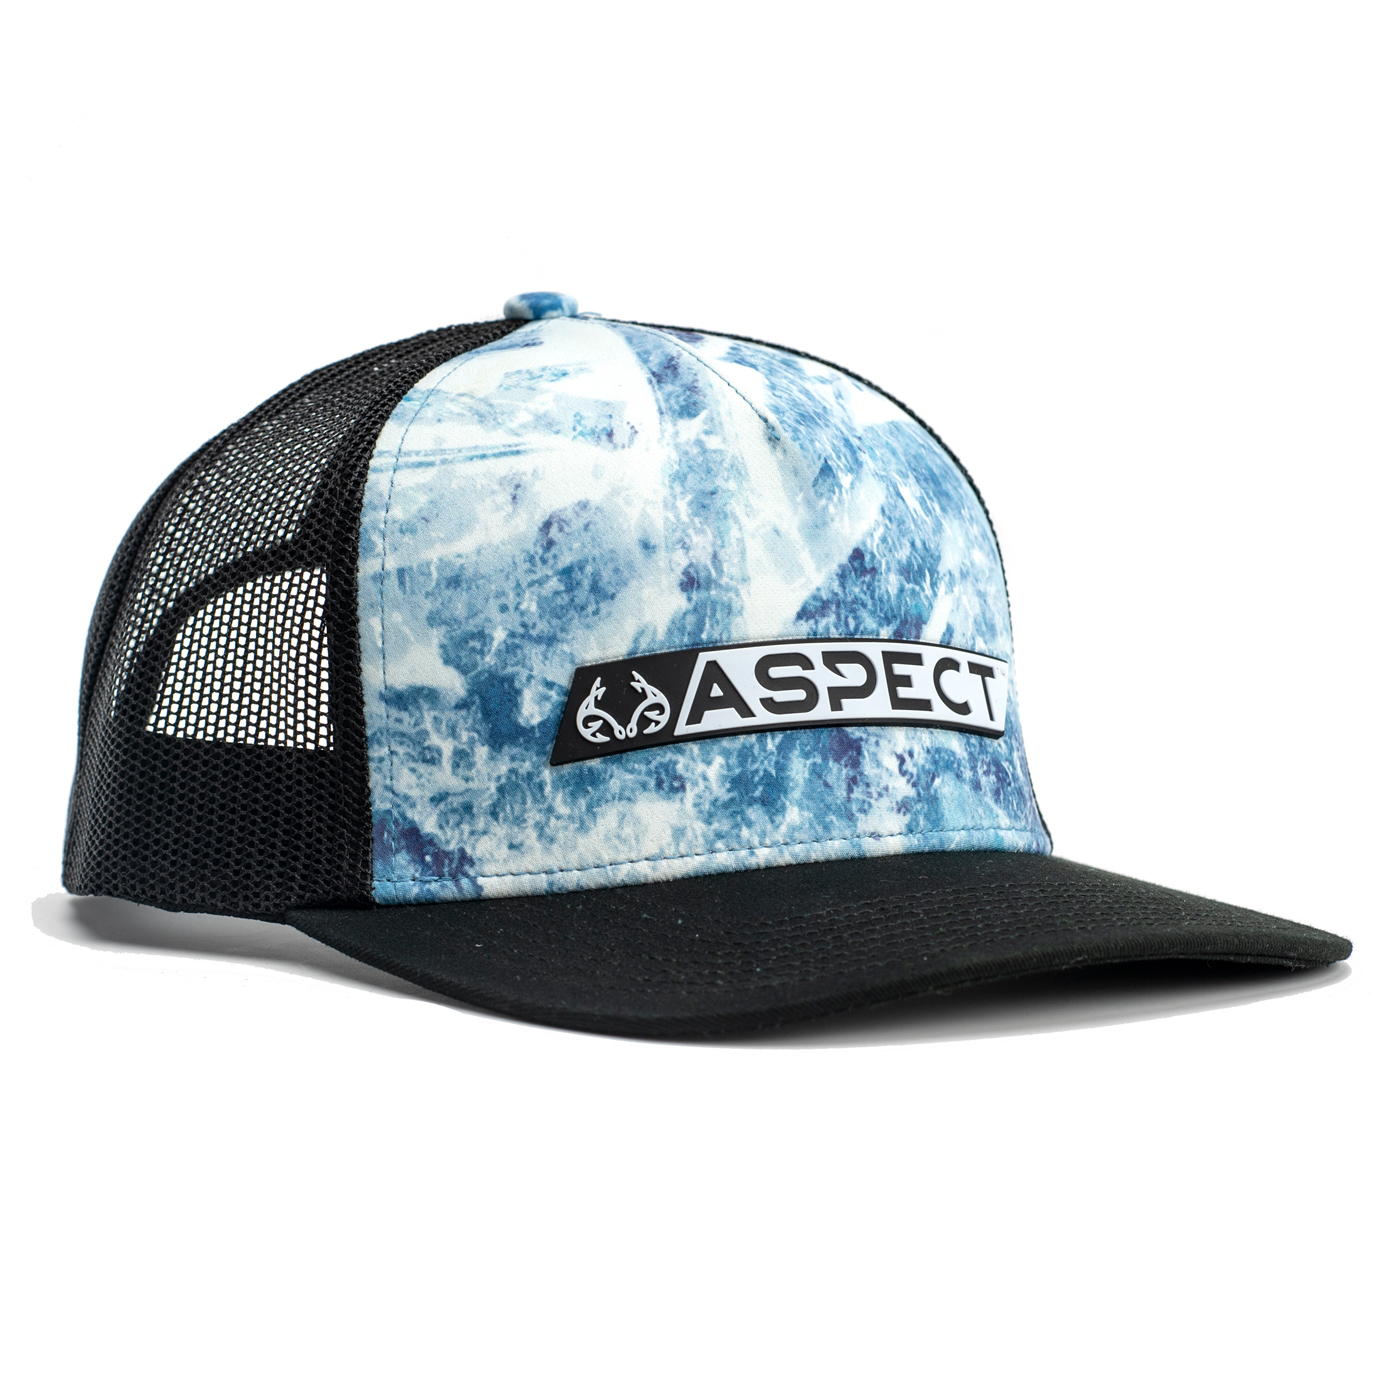 Realtree Aspect Sky Blue Fishing Mesh Back Hat, Size: One Size